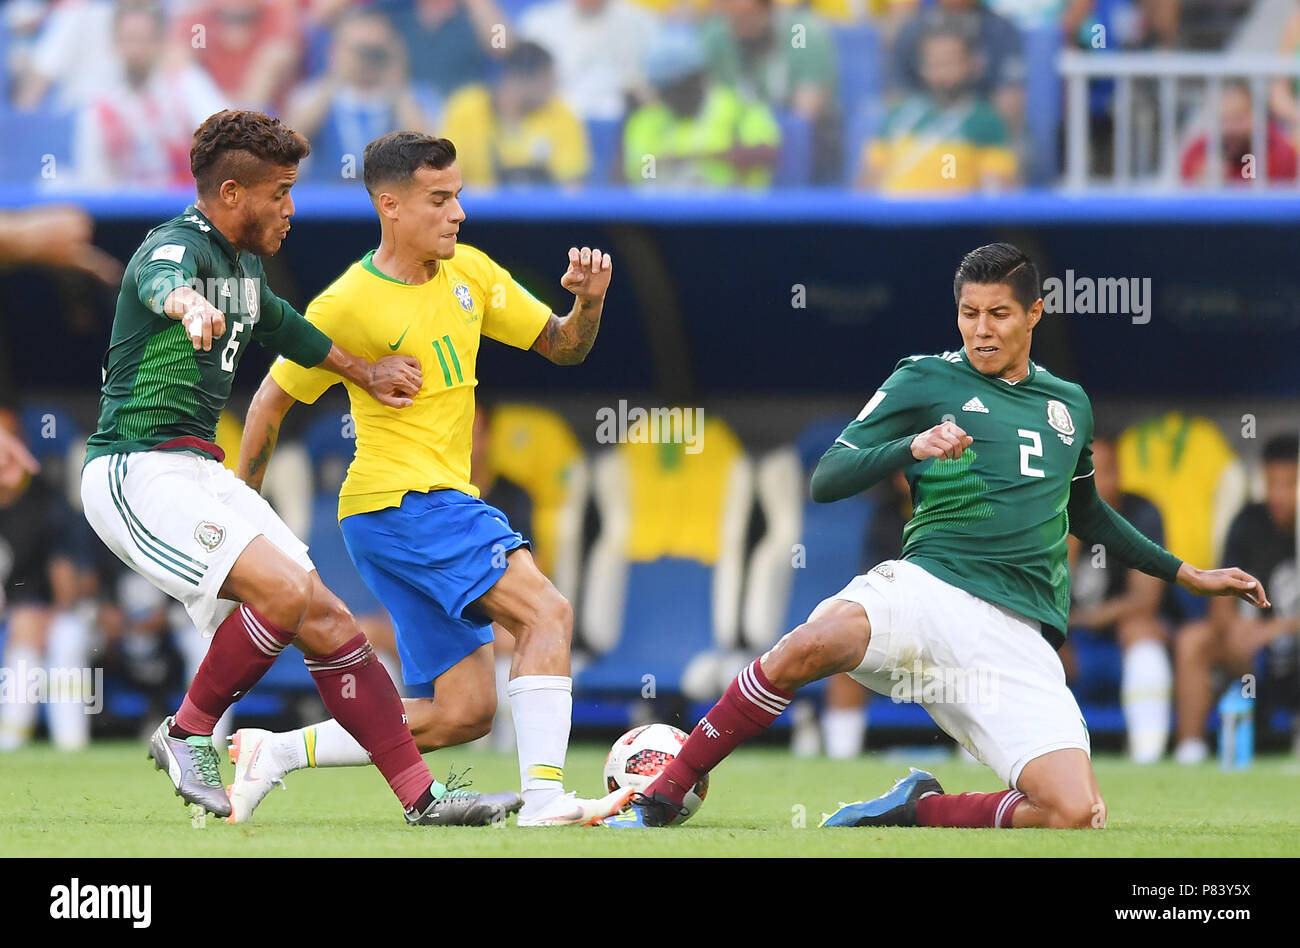 SAMARA, RUSSIA - JULY 02: Jonathan Dos Santosand Hugo Ayala of Mexico competes with Philippe Coutinho of Brazil during the 2018 FIFA World Cup Russia Round of 16 match between Brazil and Mexico at Samara Arena on July 2, 2018 in Samara, Russia. (Photo by Lukasz Laskowski/PressFocus/MB Media) Stock Photo